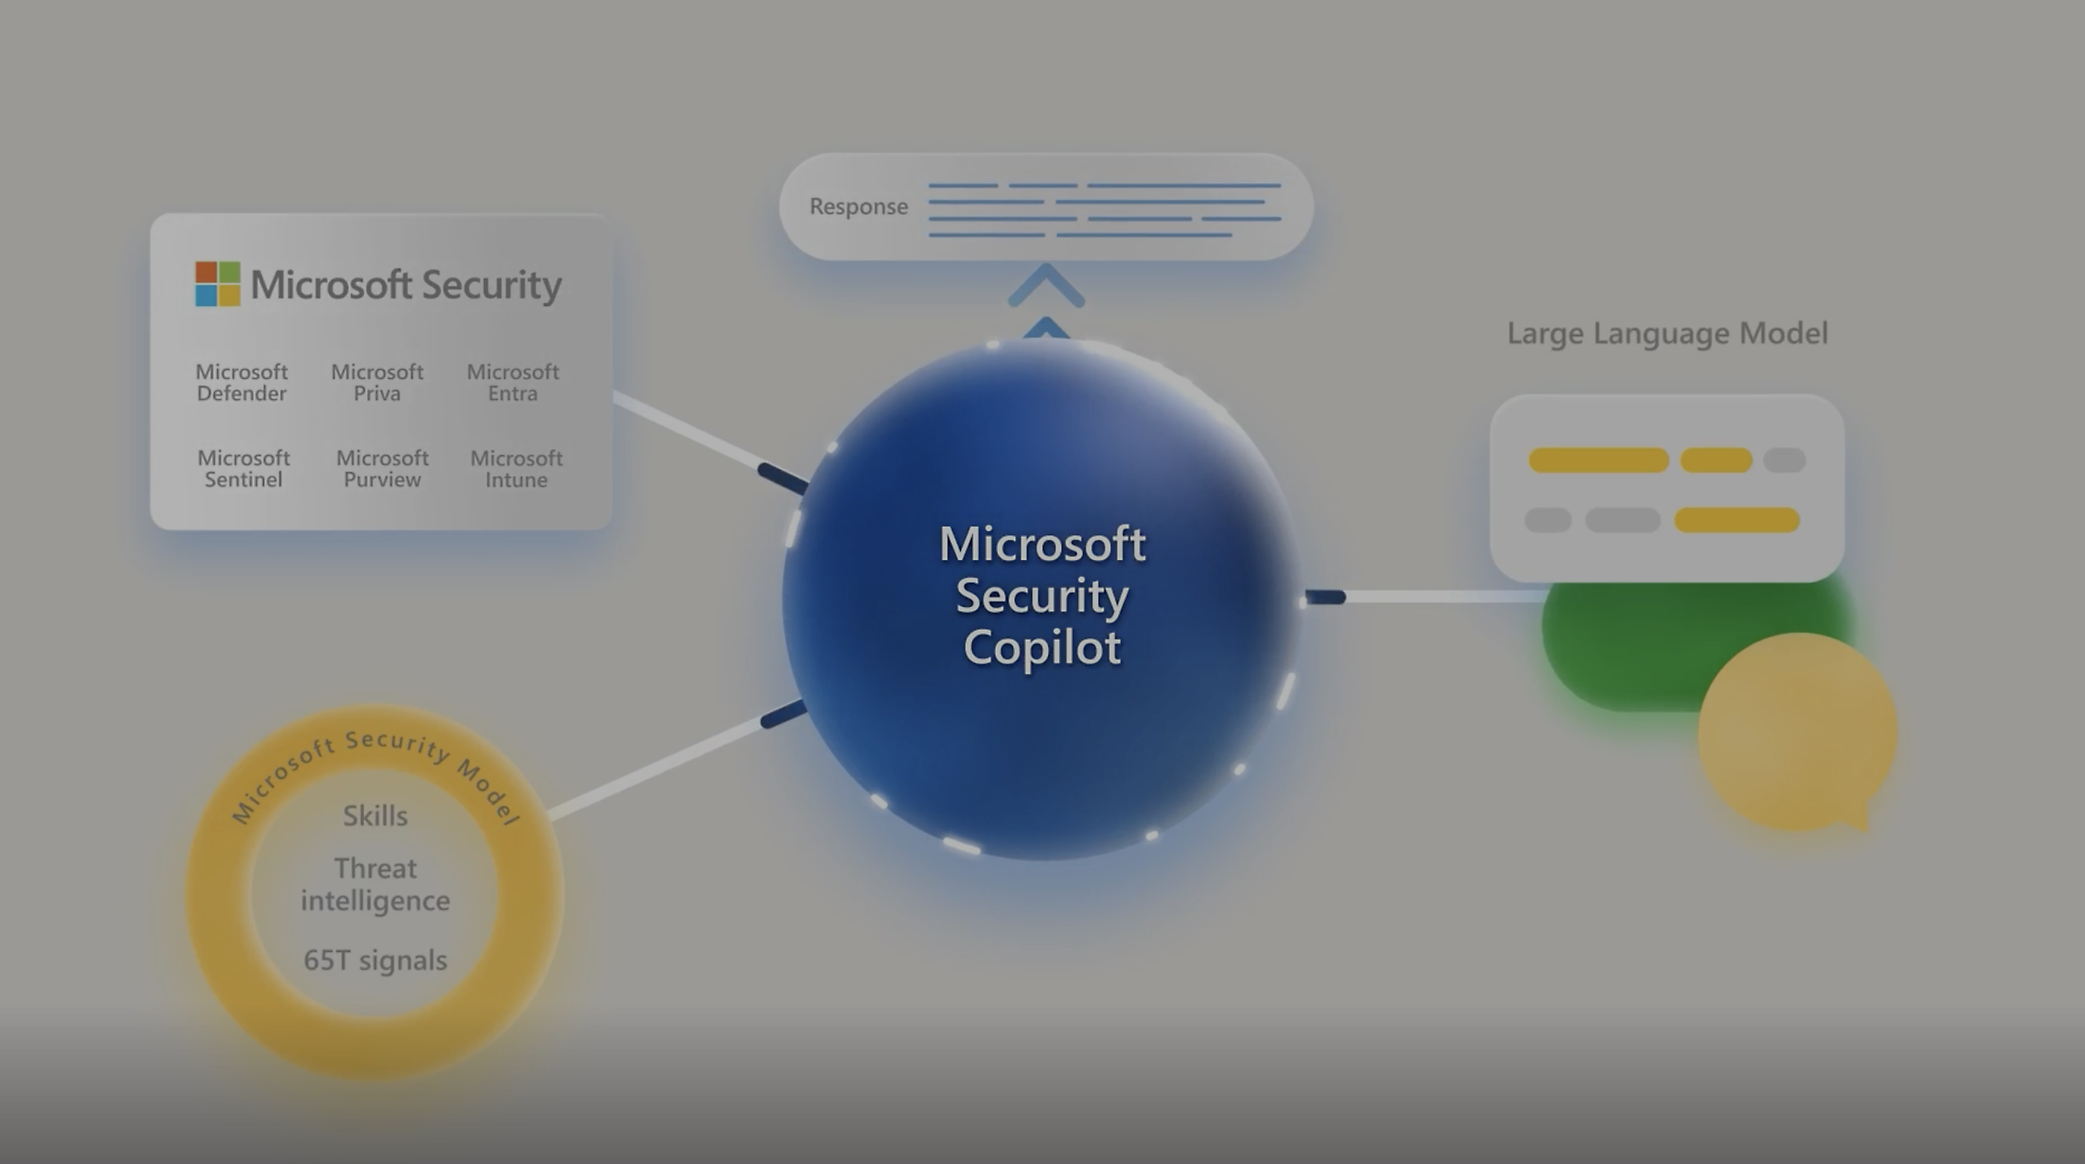 Microsoft Security: Defender, Entra, Sentinel, Priva, Purview, Intune, Copilot, Threat intelligence, 65T signals